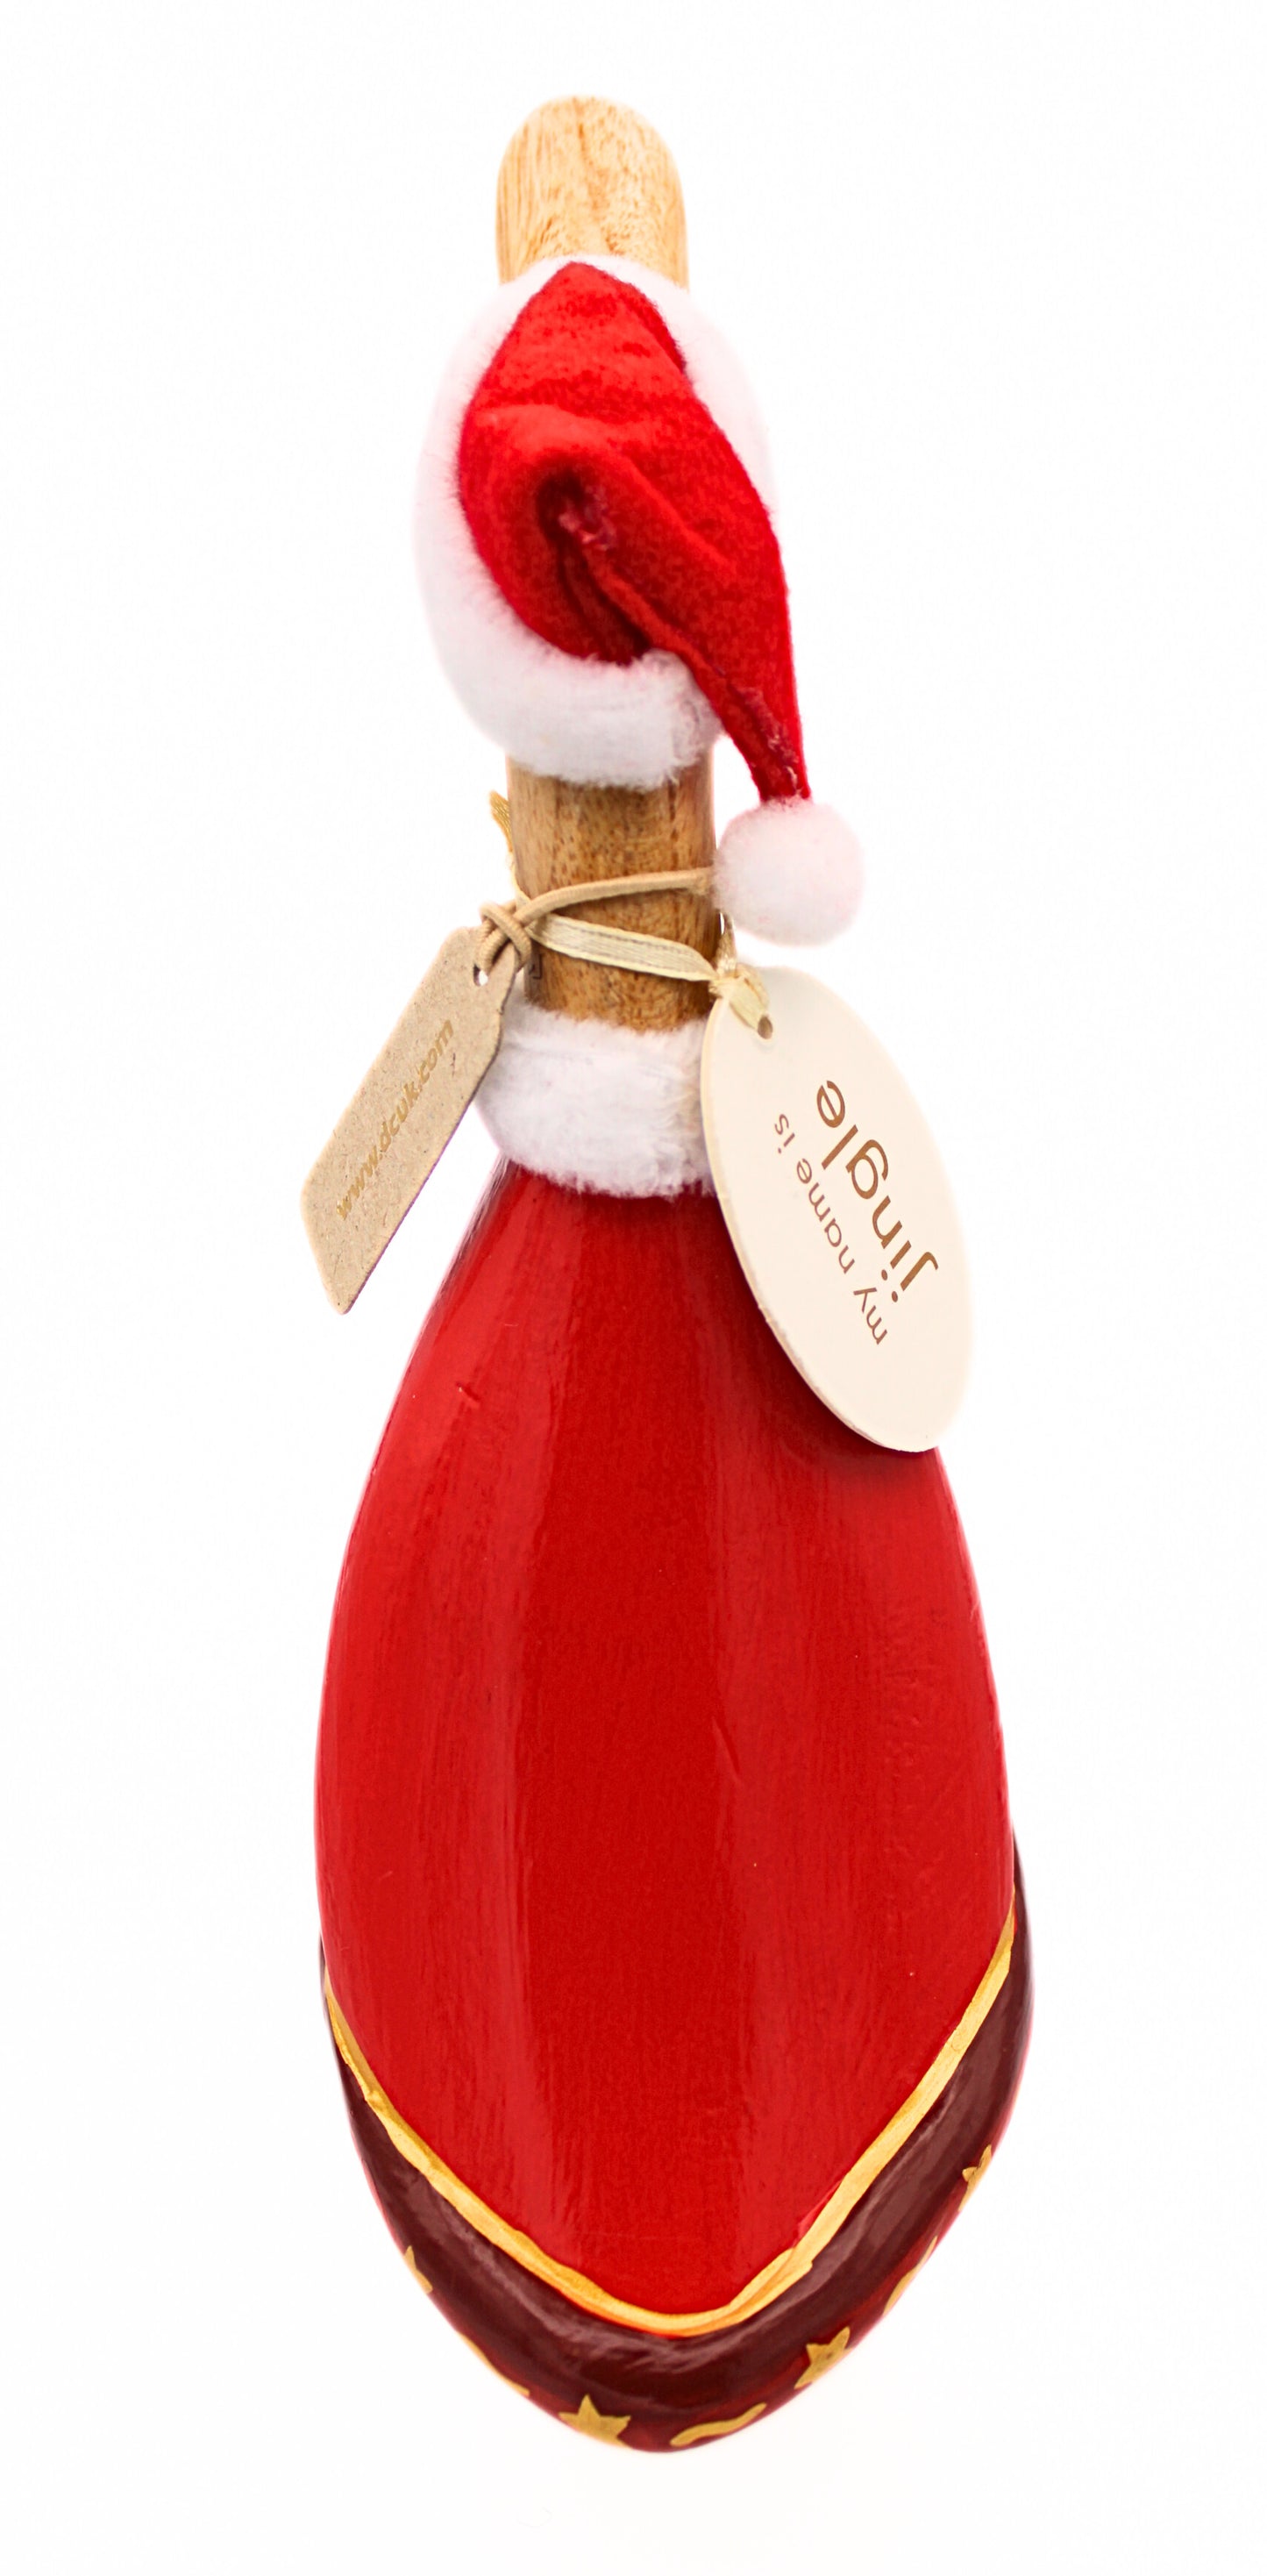 Back View of DCUK Christmas Duckling in Santa Design